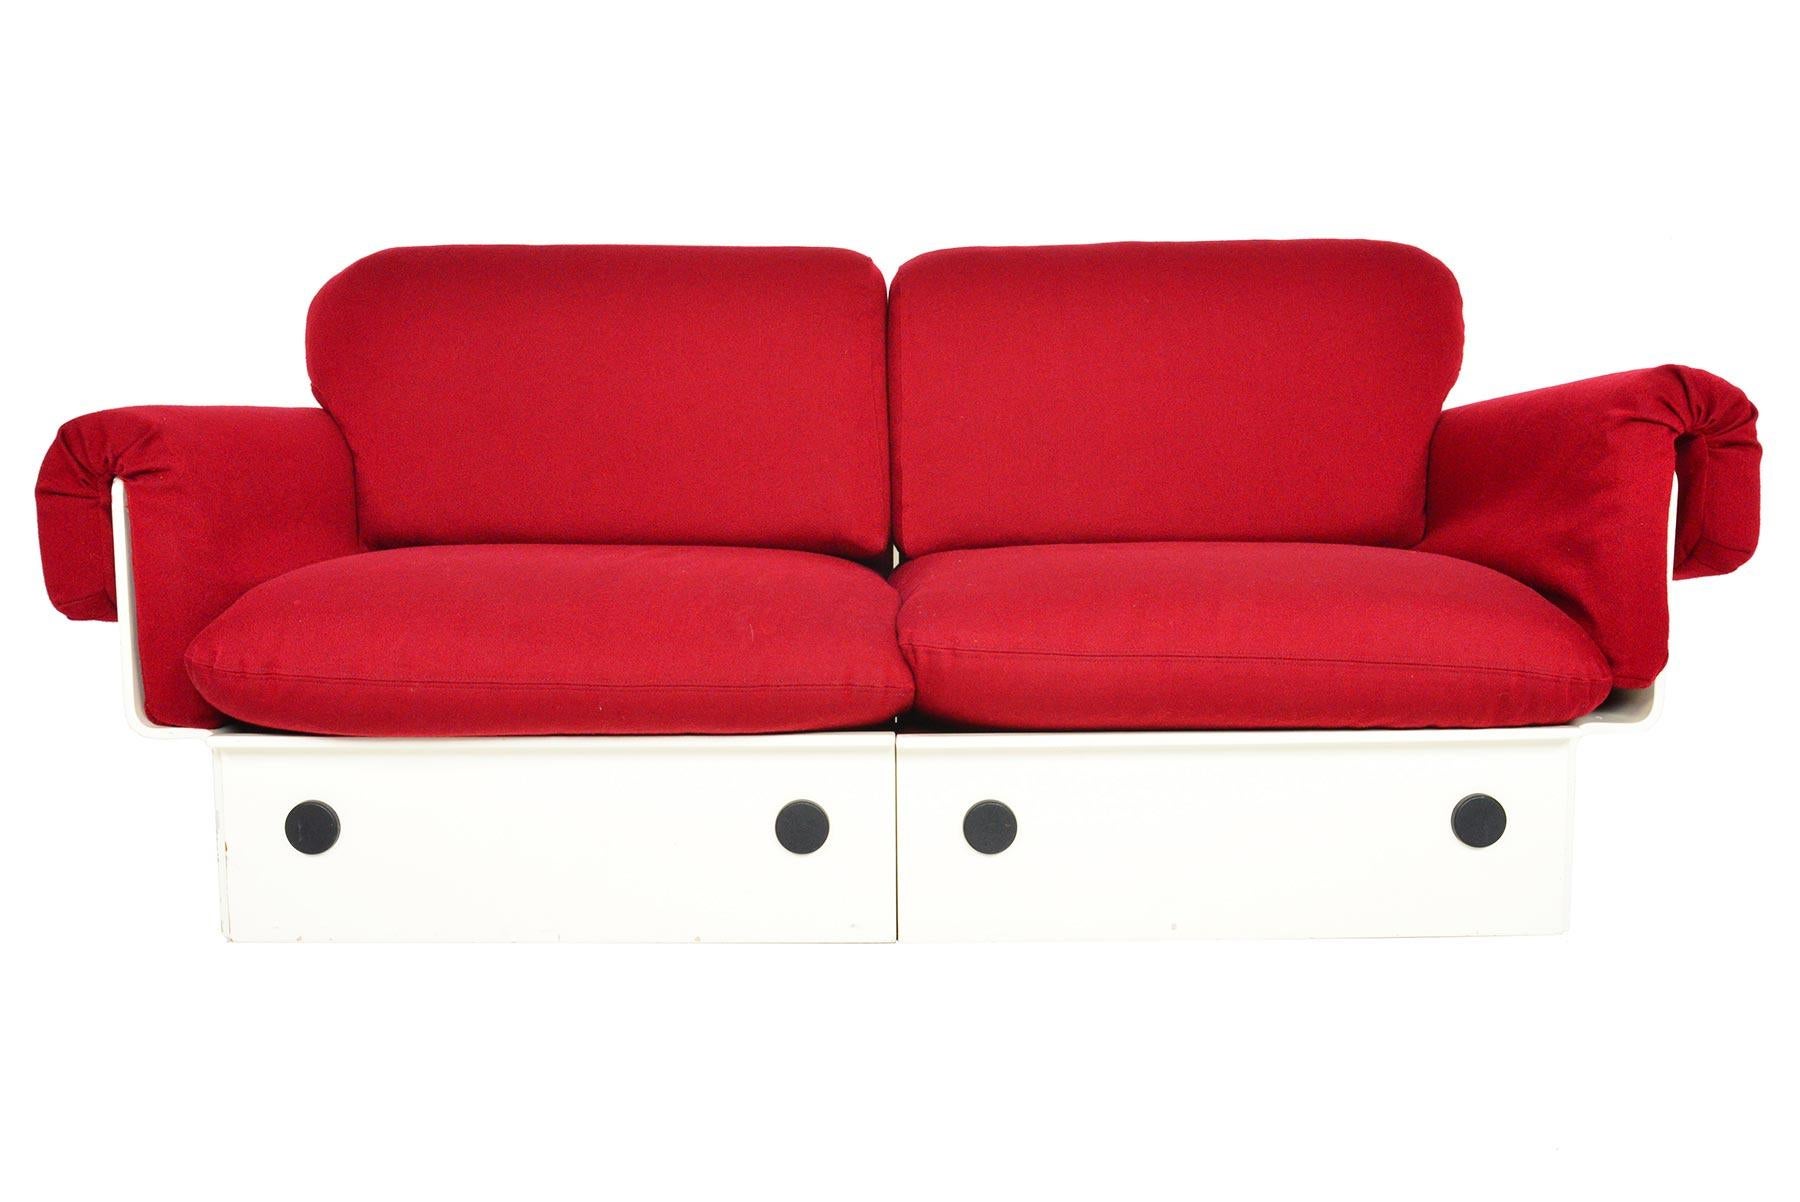 Designed at the height of the Space Age, this Danish modern loveseat offers a stunning silhouette and lounge worthy seating. A molded, white lacquer wood frame holds six cushions. Inside the frame, four casters allow this piece to be easily